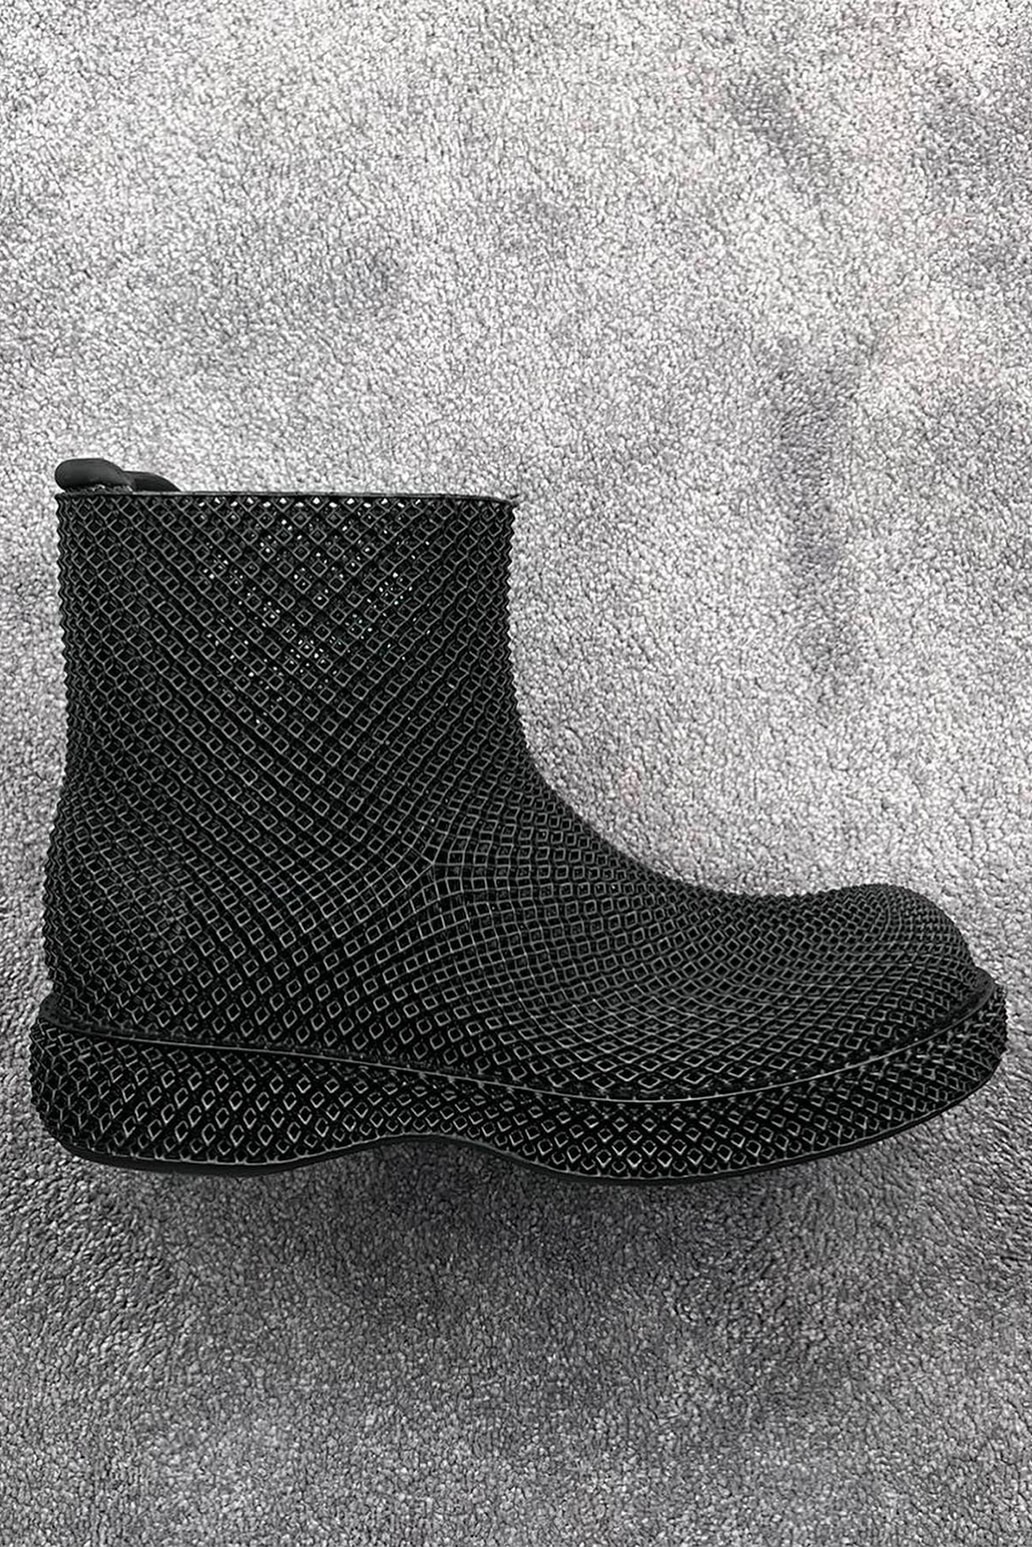 Thibo Denis dior men winter 2023 collection grid weave black leather release info closer look